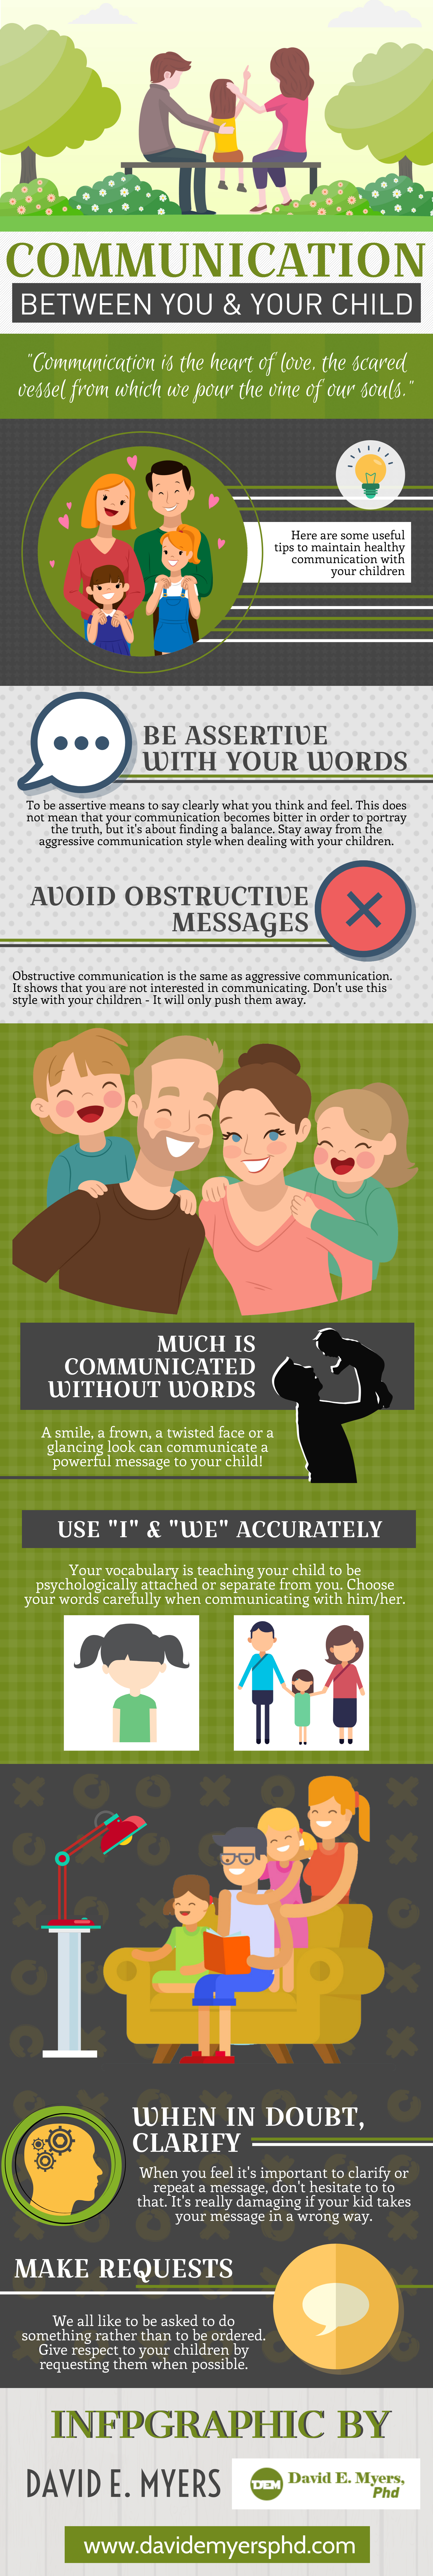 Communication Between You and Your Child